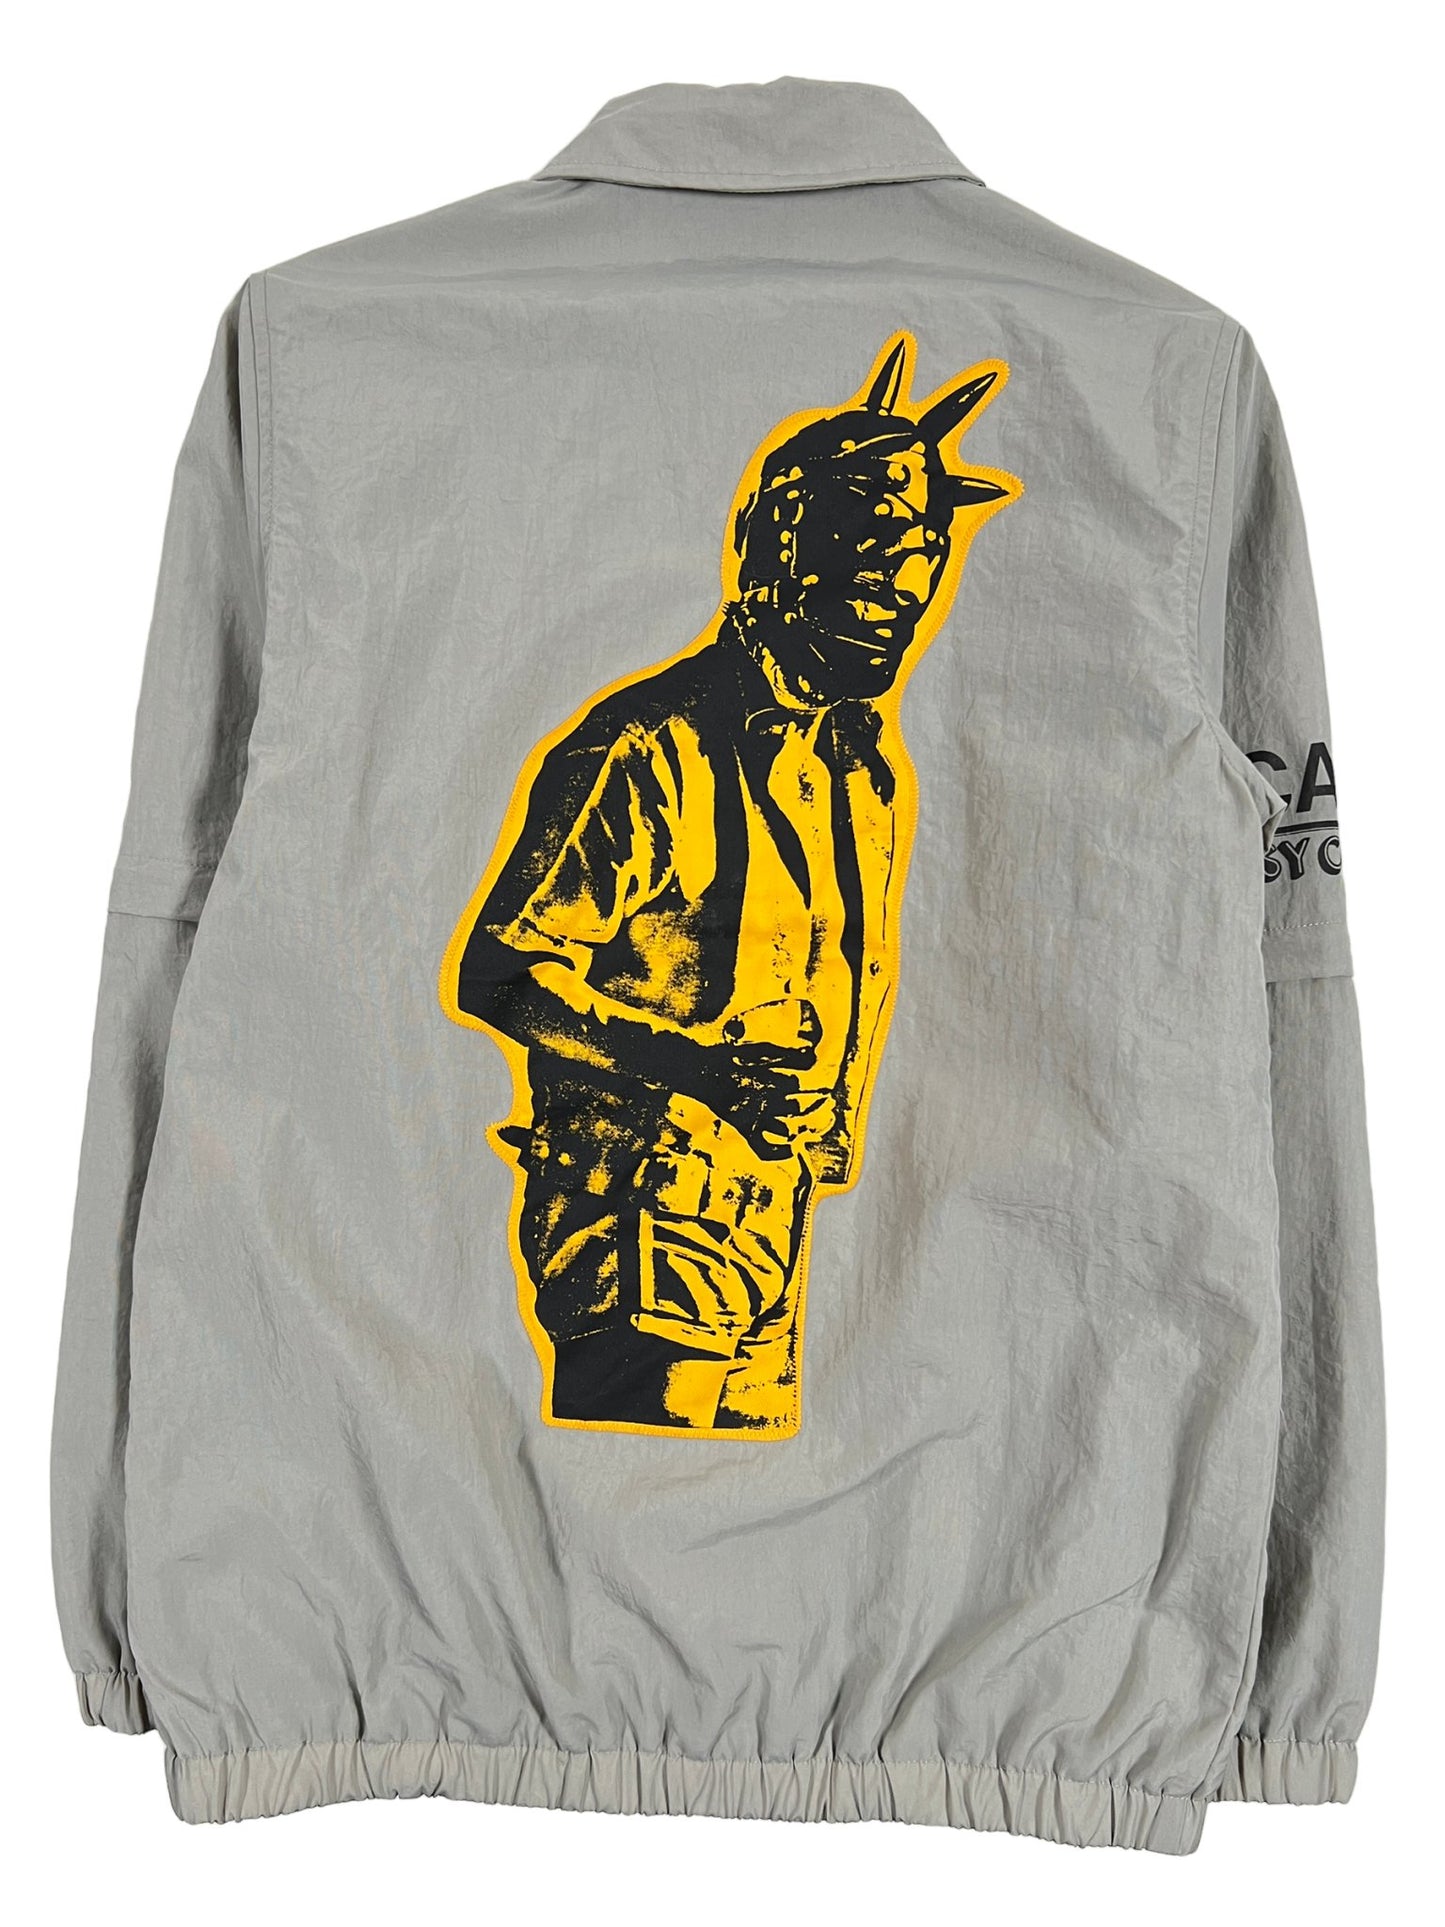 A grey PLEASURES Polyester jacket with an embroidered logo detail of a man holding a gun.